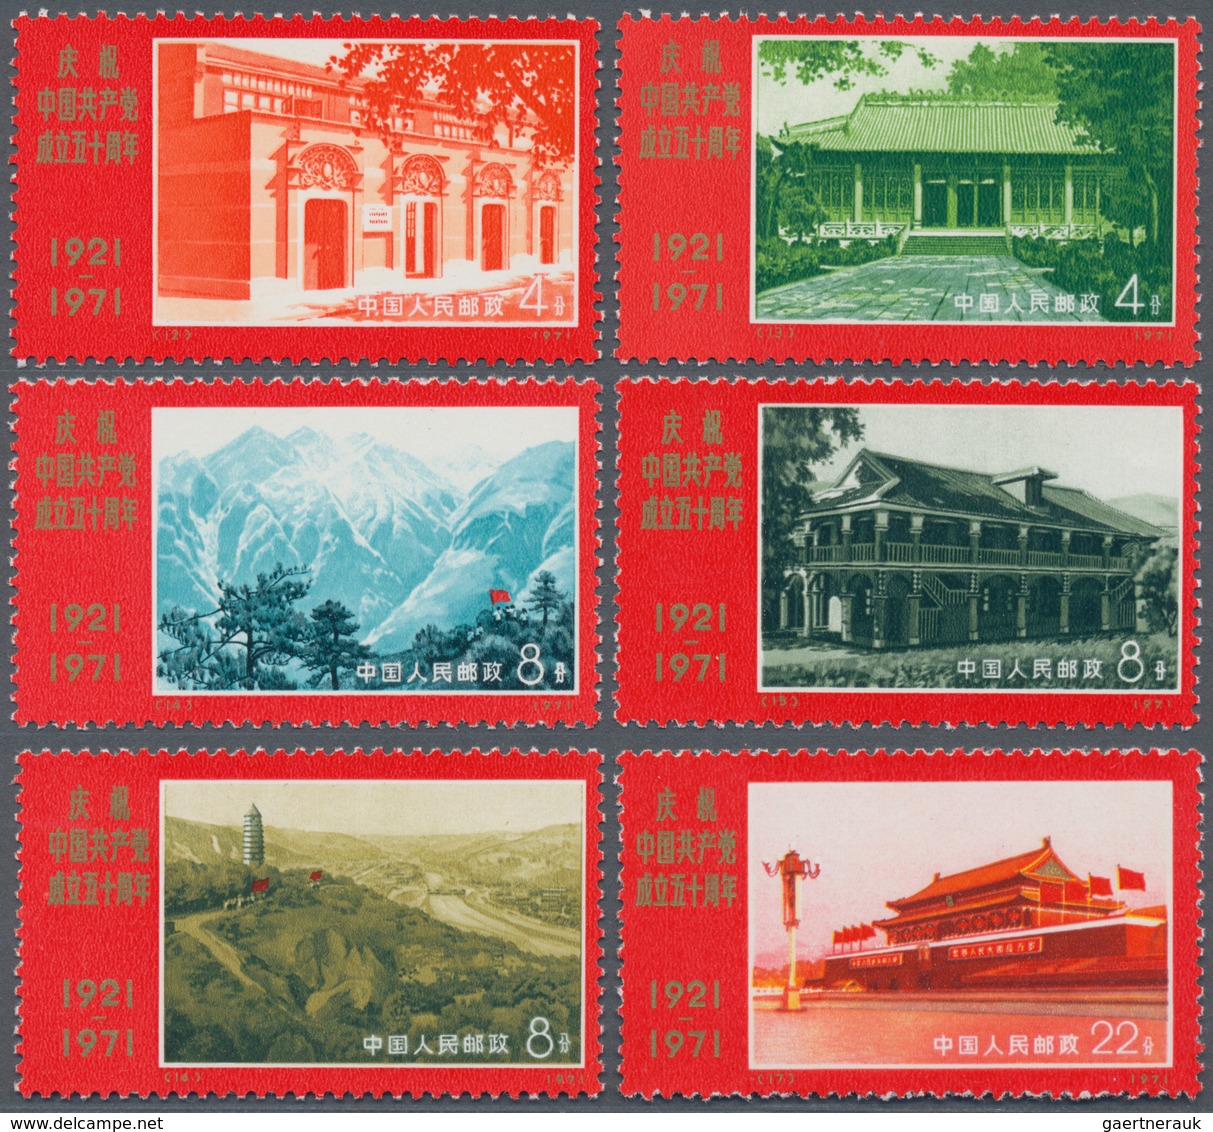 China - Volksrepublik: 1971, three sets unused no gum as issued: Communist Party incl. unfolded stri